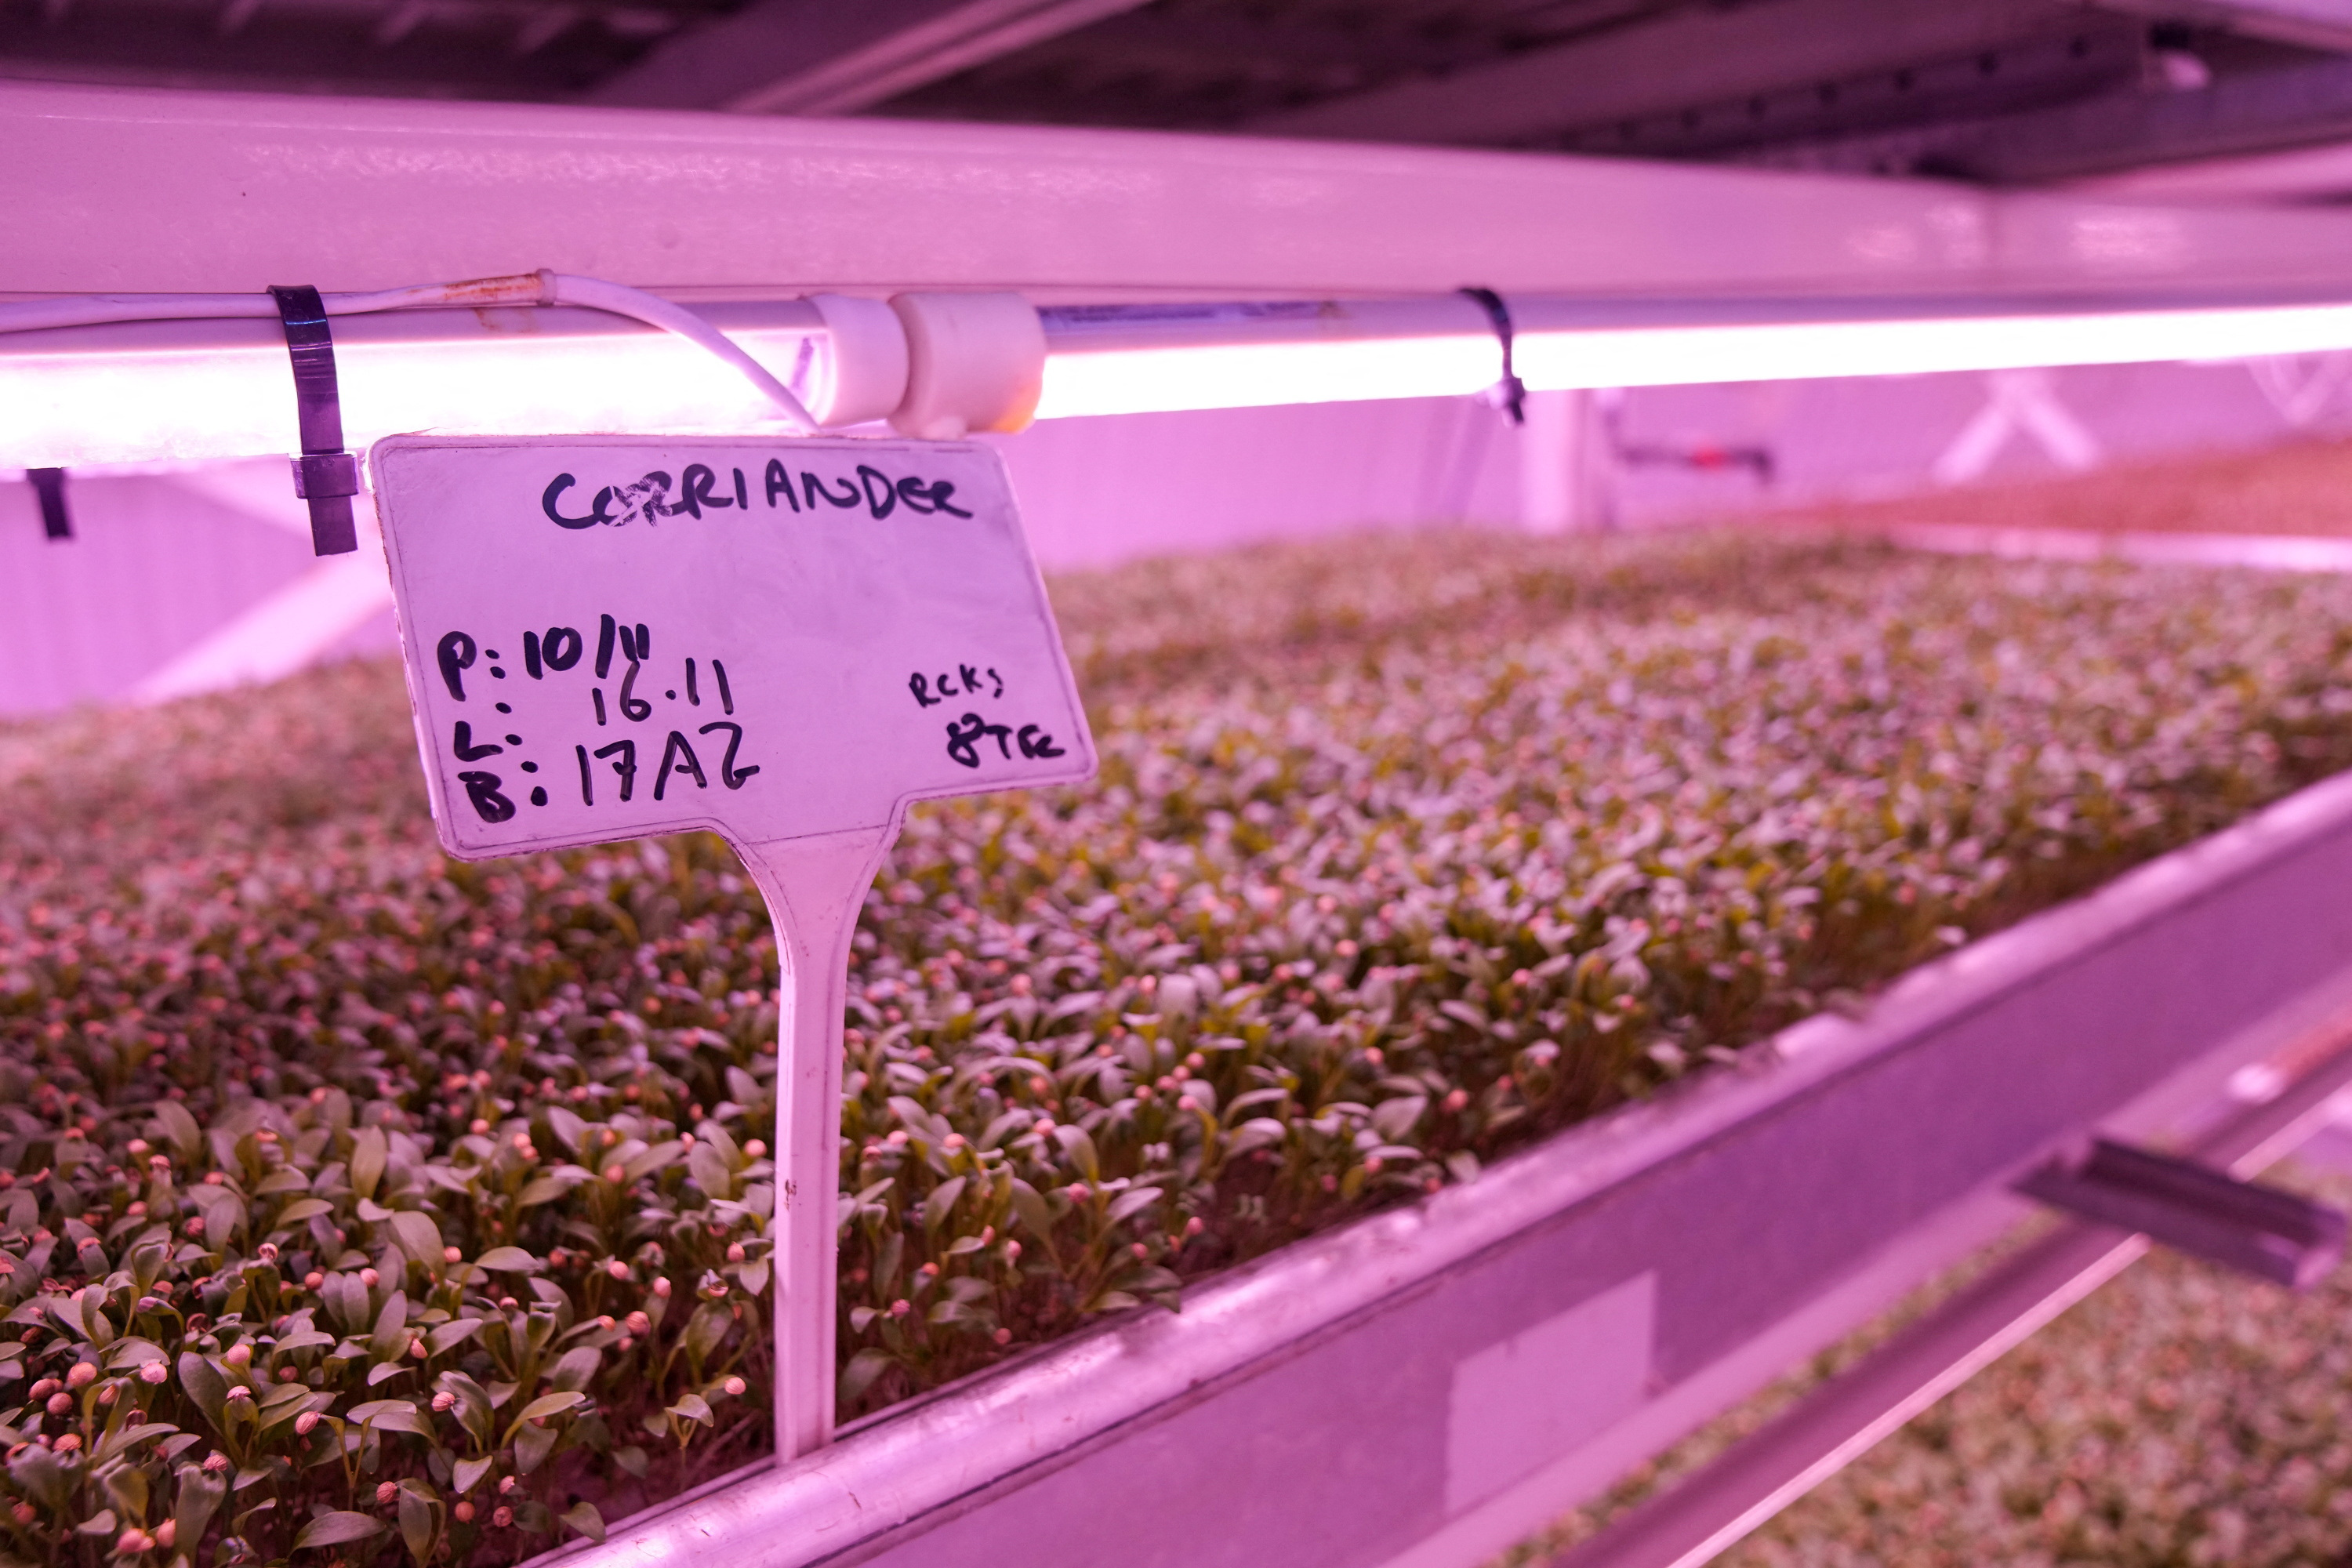 Underground farm grows plants without soil under Londoners' feet